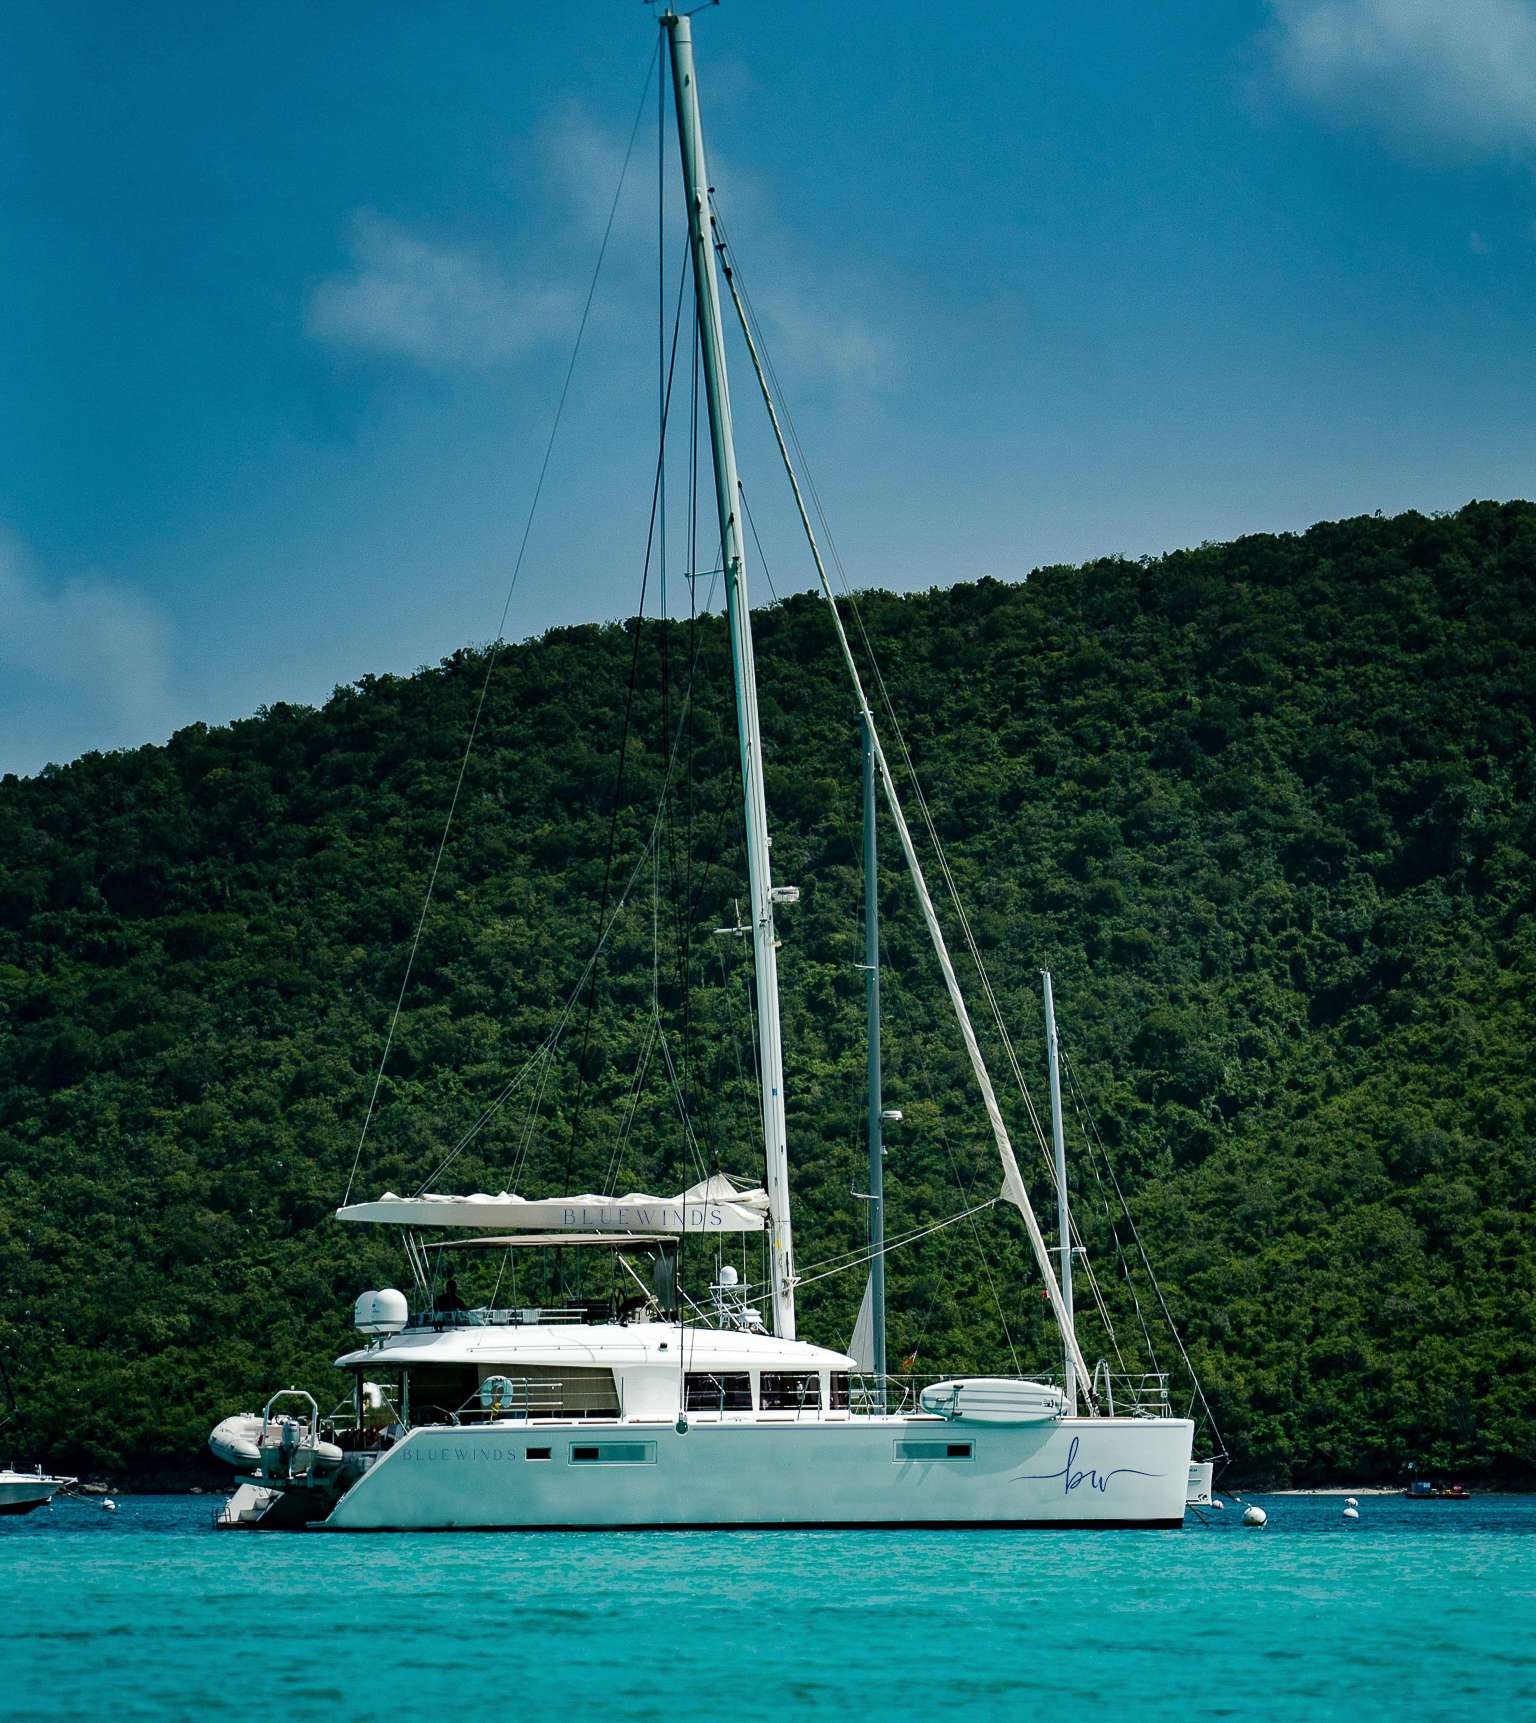 Bluewinds Crewed Lagoon 560 at Anchor in the USVI